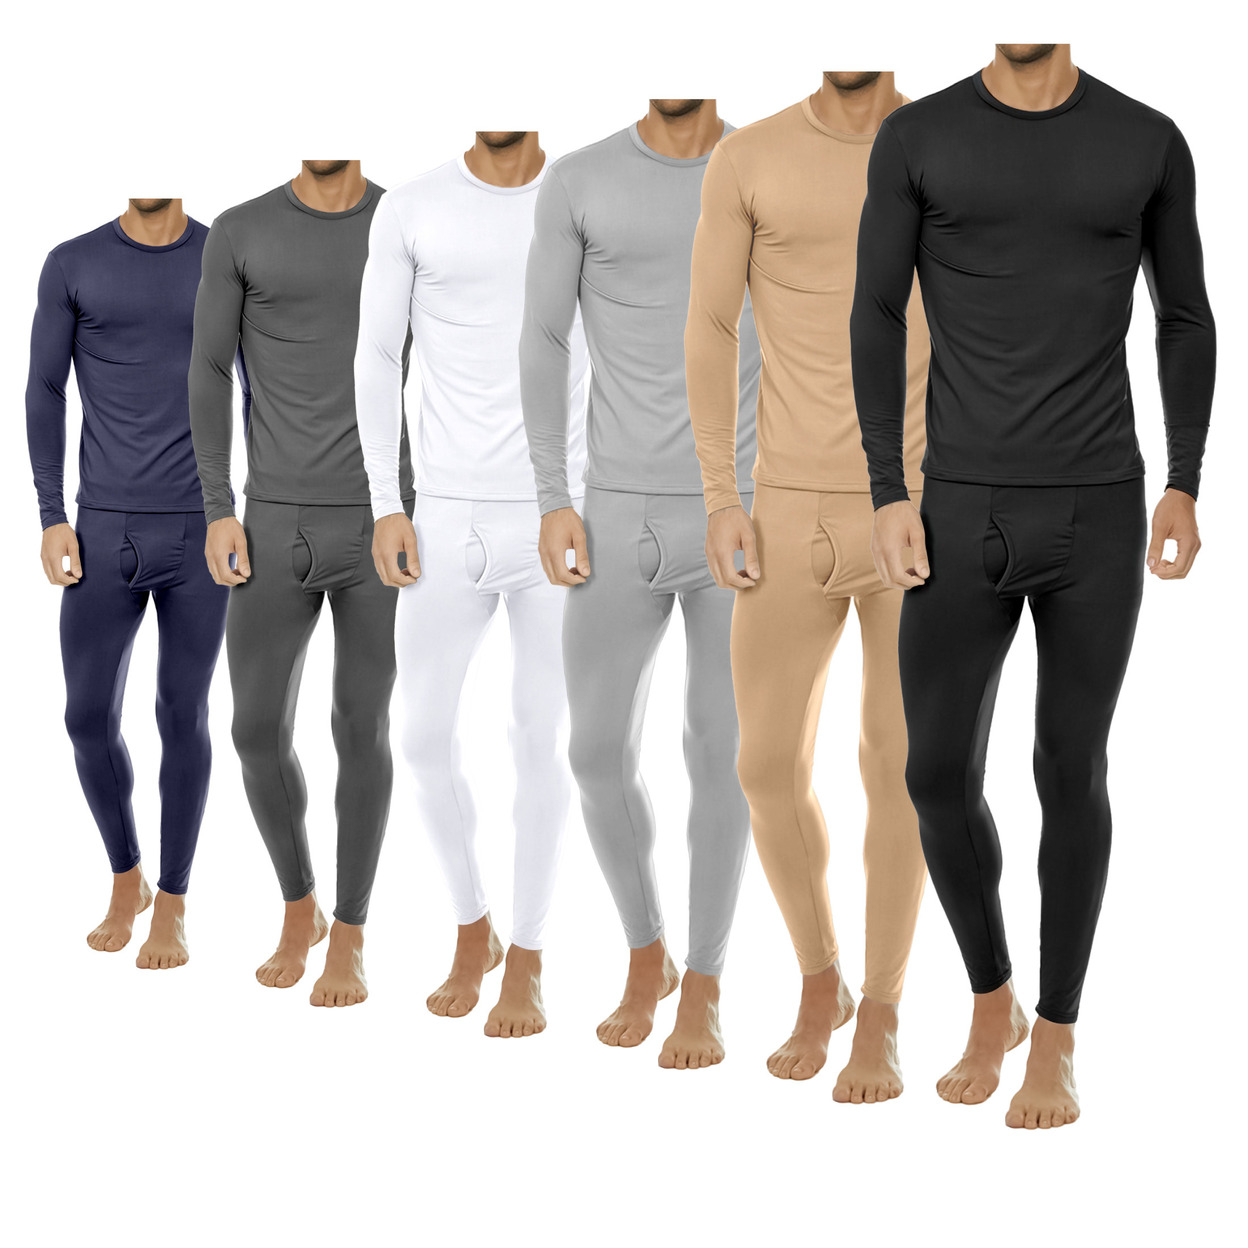 2-Pieces: Men's Winter Warm Fleece Lined Thermal Underwear Set For Cold Weather - Tan, X-large